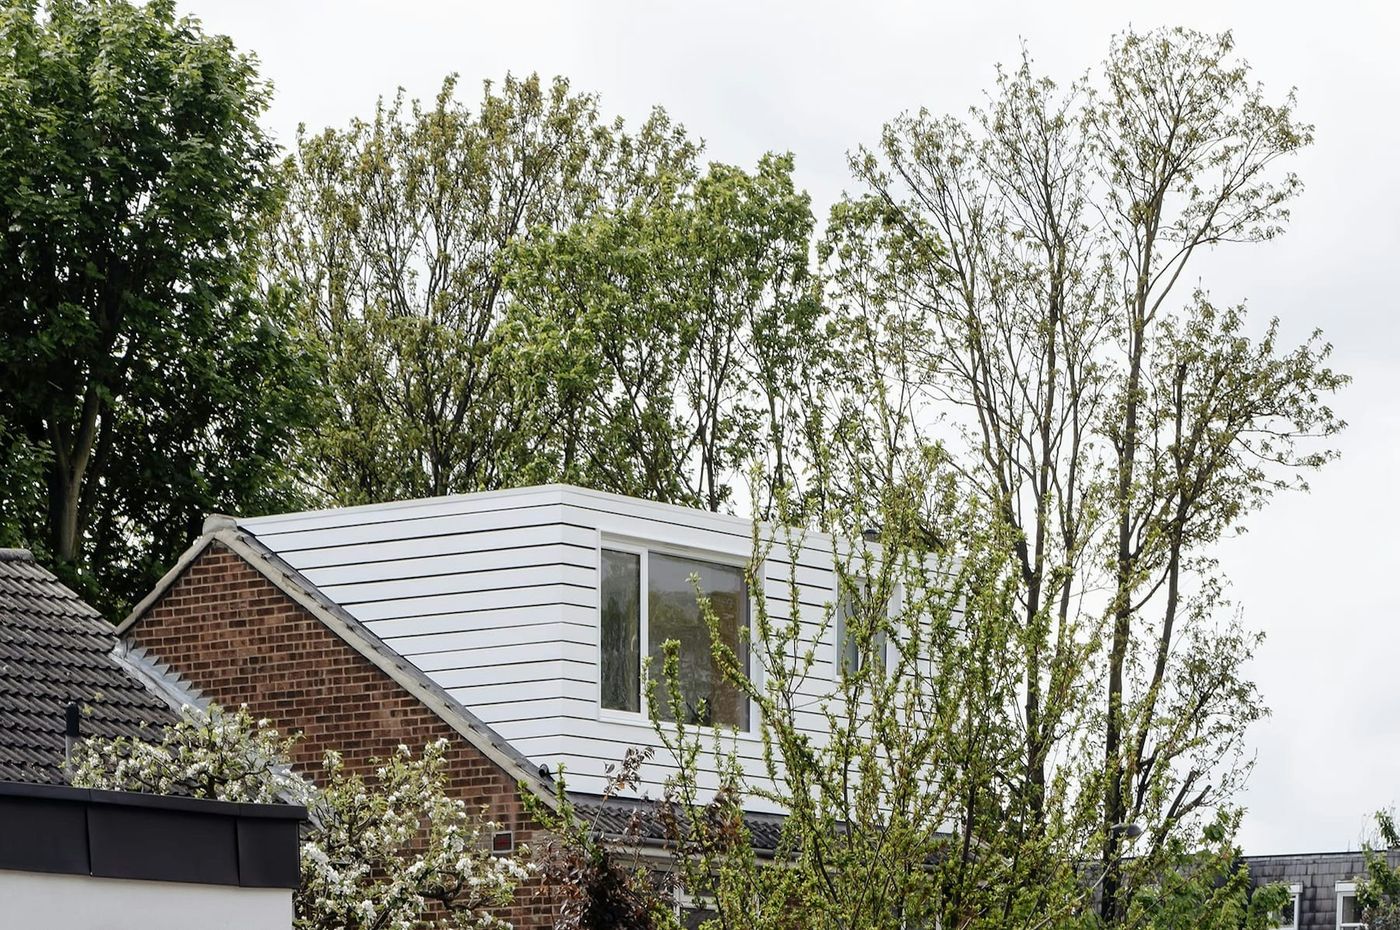 White horizontally clad timber dormer extension designed by From Works in Blackheath, London.